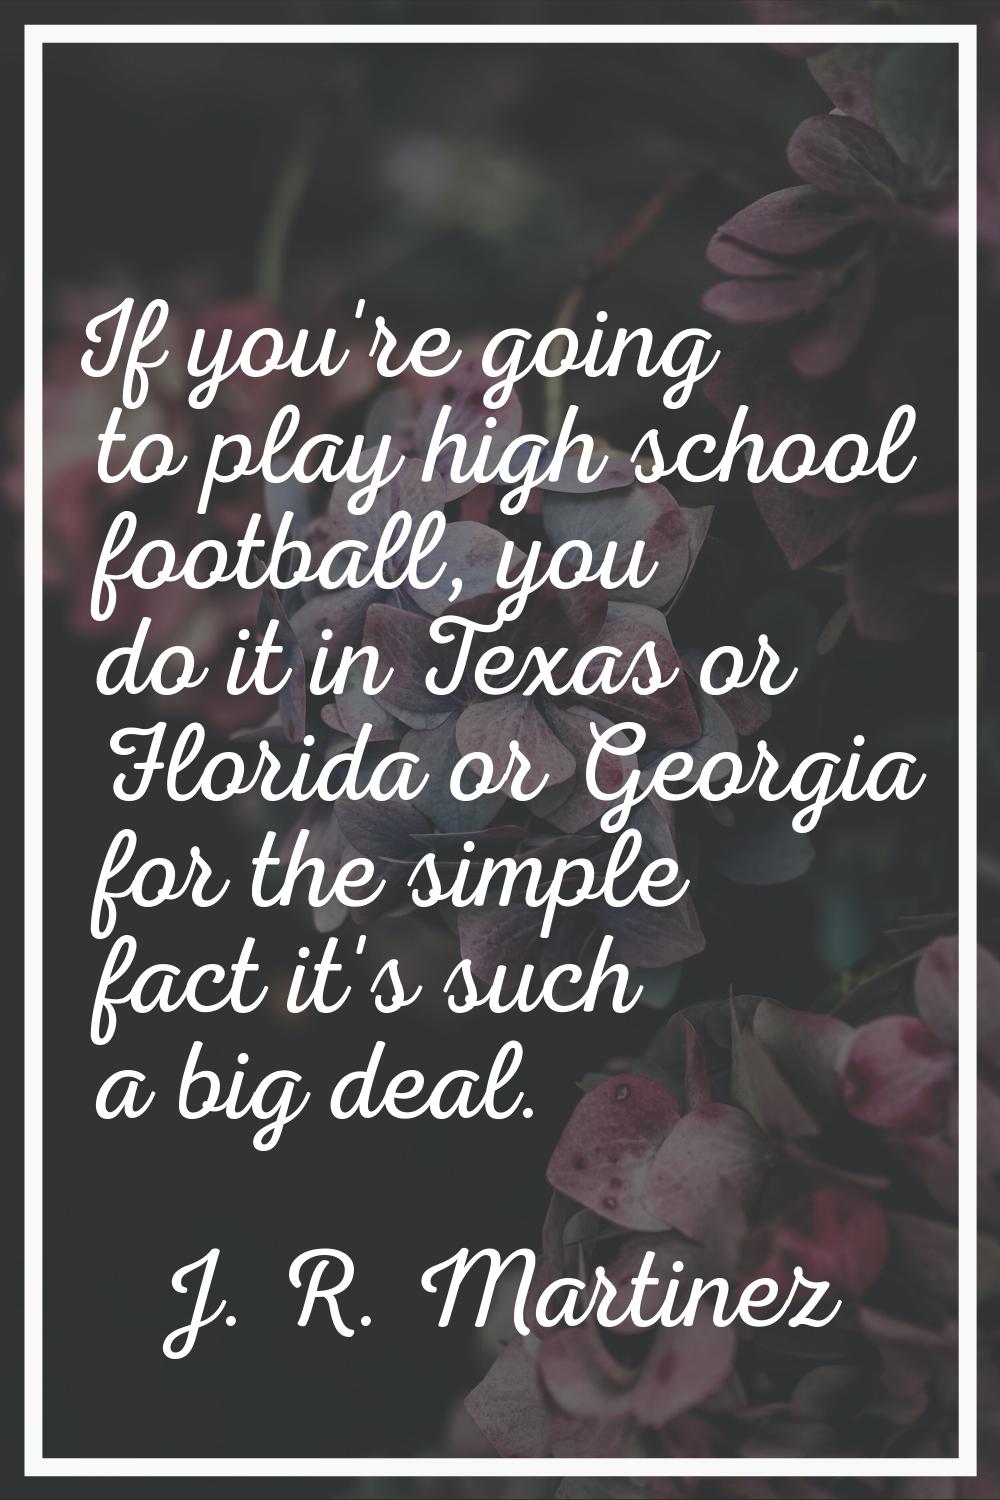 If you're going to play high school football, you do it in Texas or Florida or Georgia for the simp